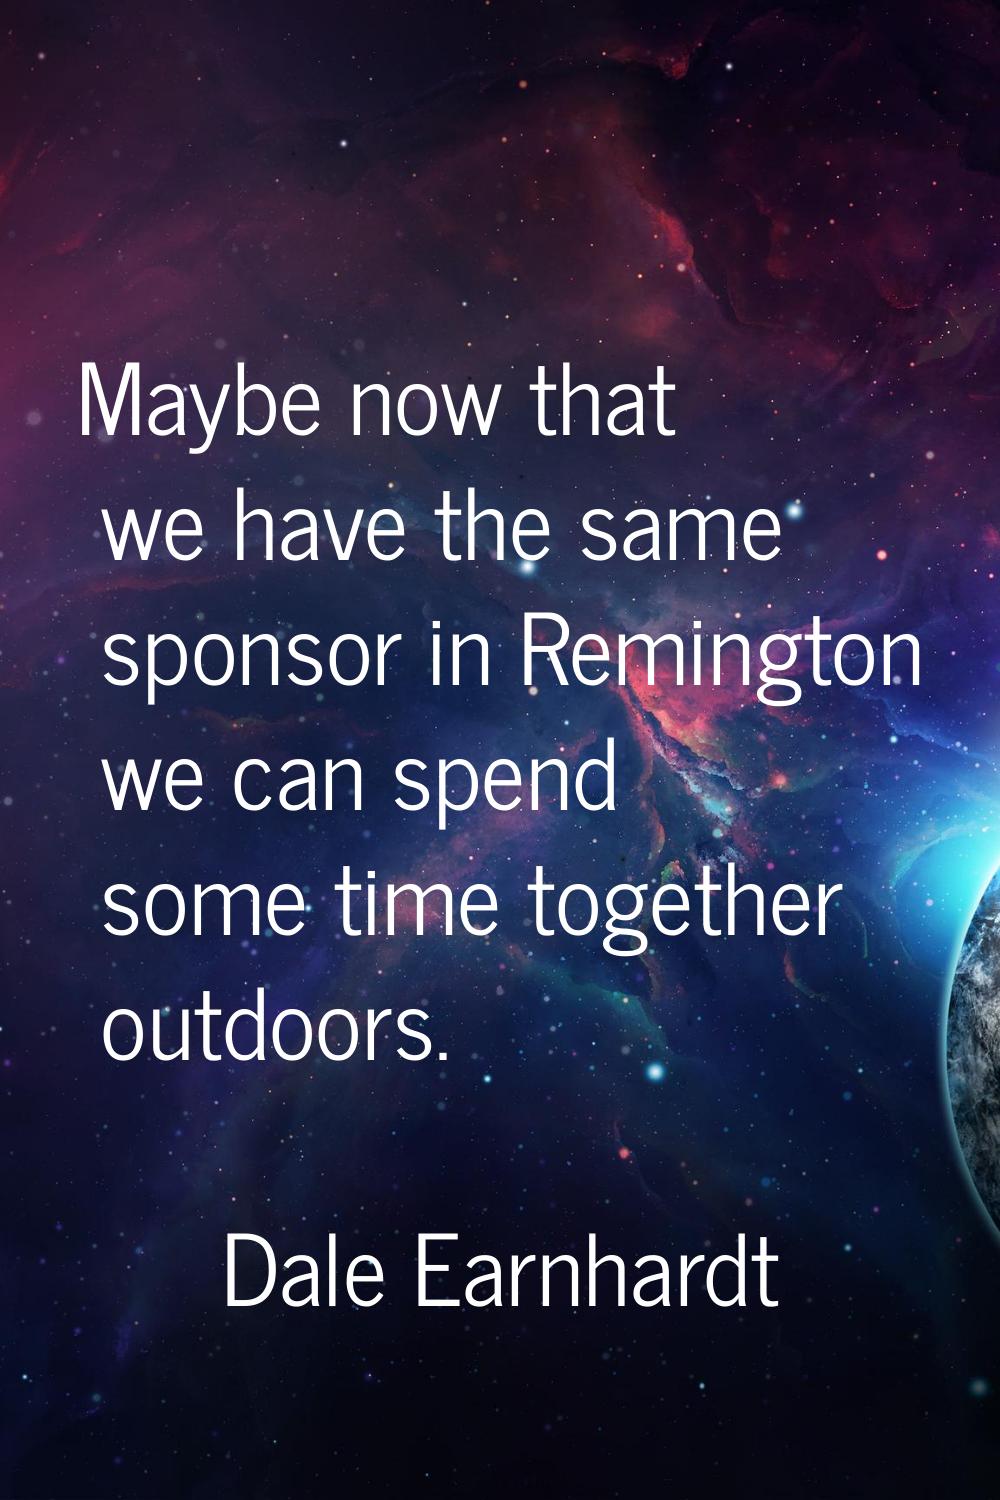 Maybe now that we have the same sponsor in Remington we can spend some time together outdoors.